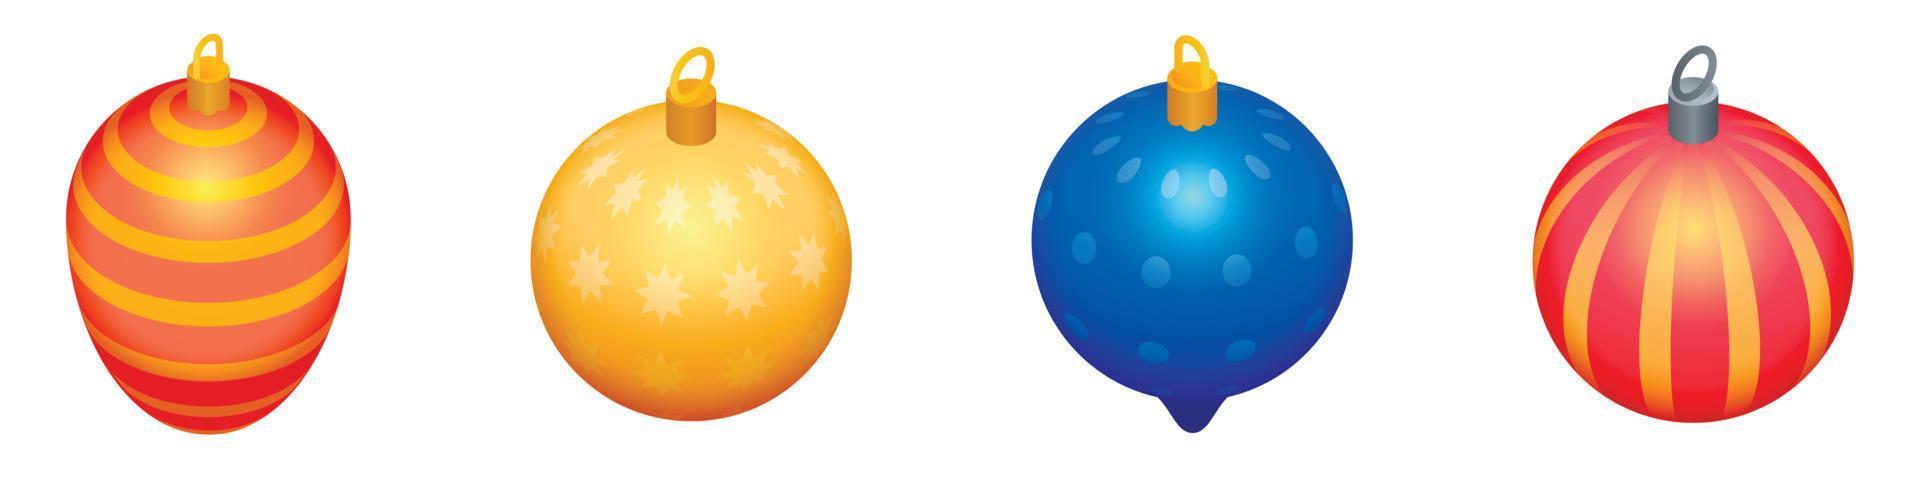 Christmas tree toys icons set, isometric style vector